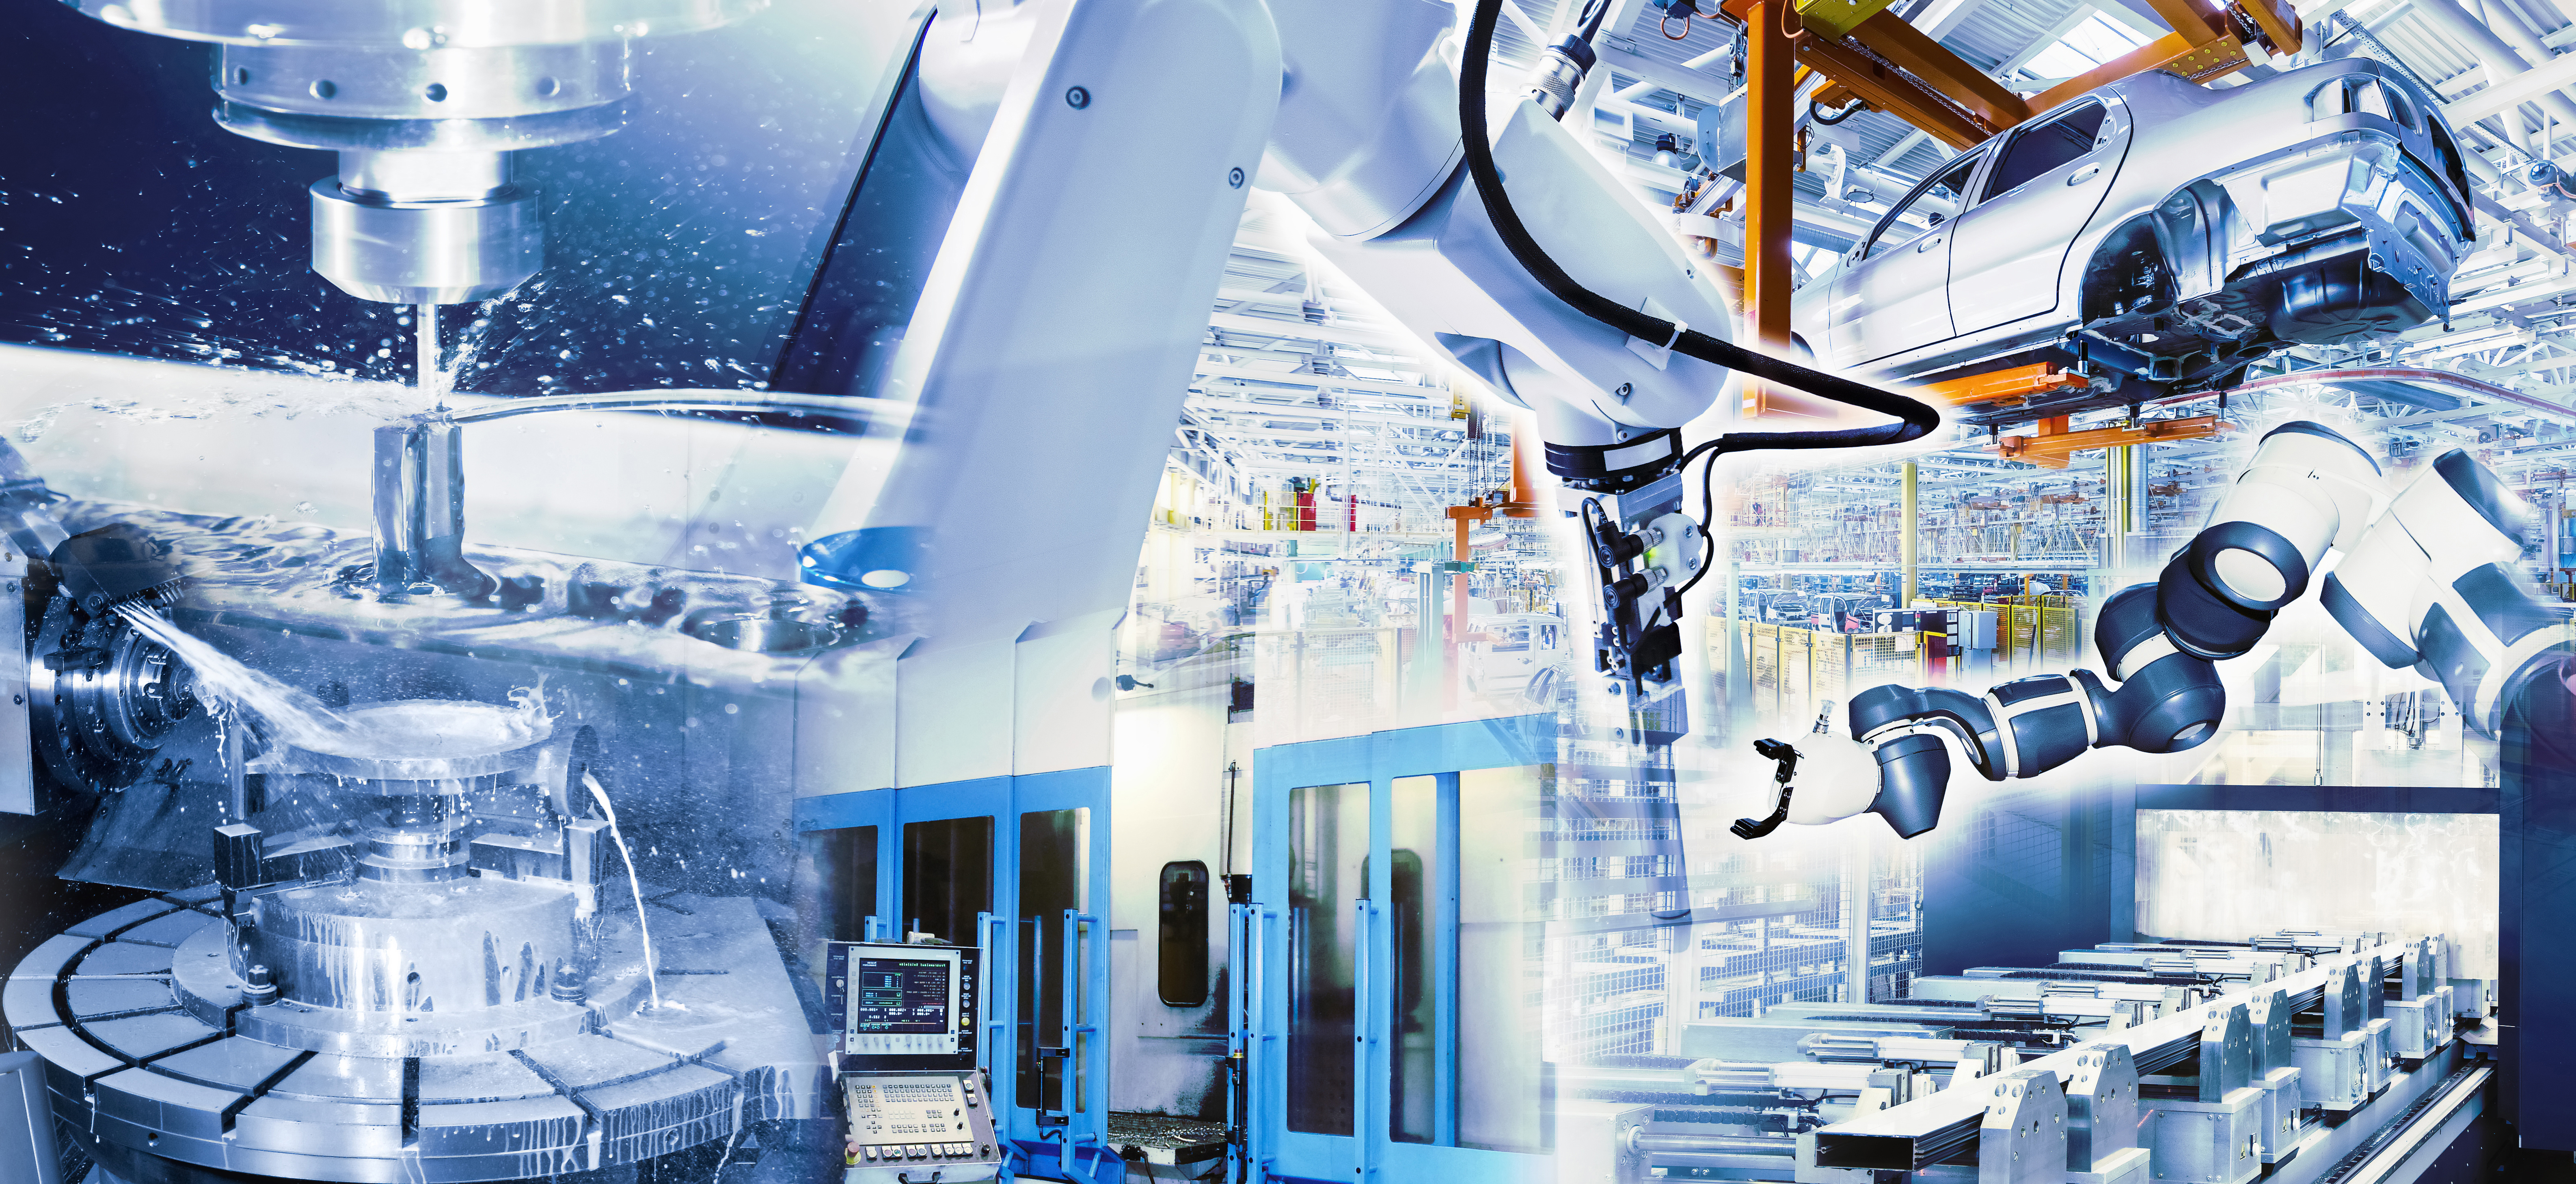 Industry 4.0 with high-tech technology